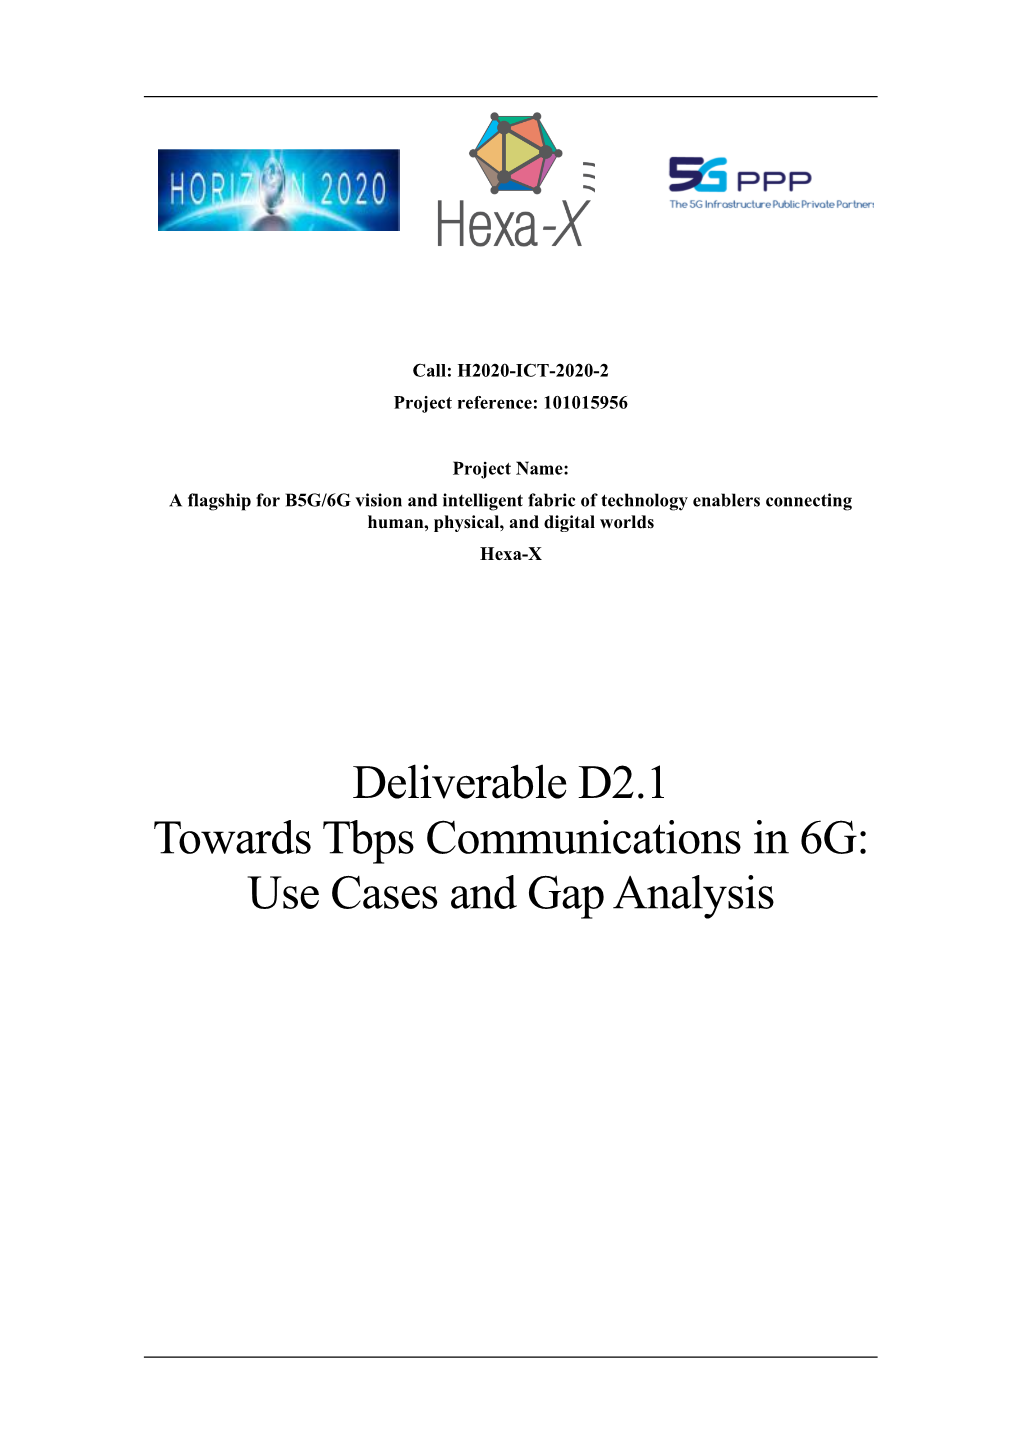 Deliverable D2.1 Towards Tbps Communications in 6G: Use Cases and Gap Analysis